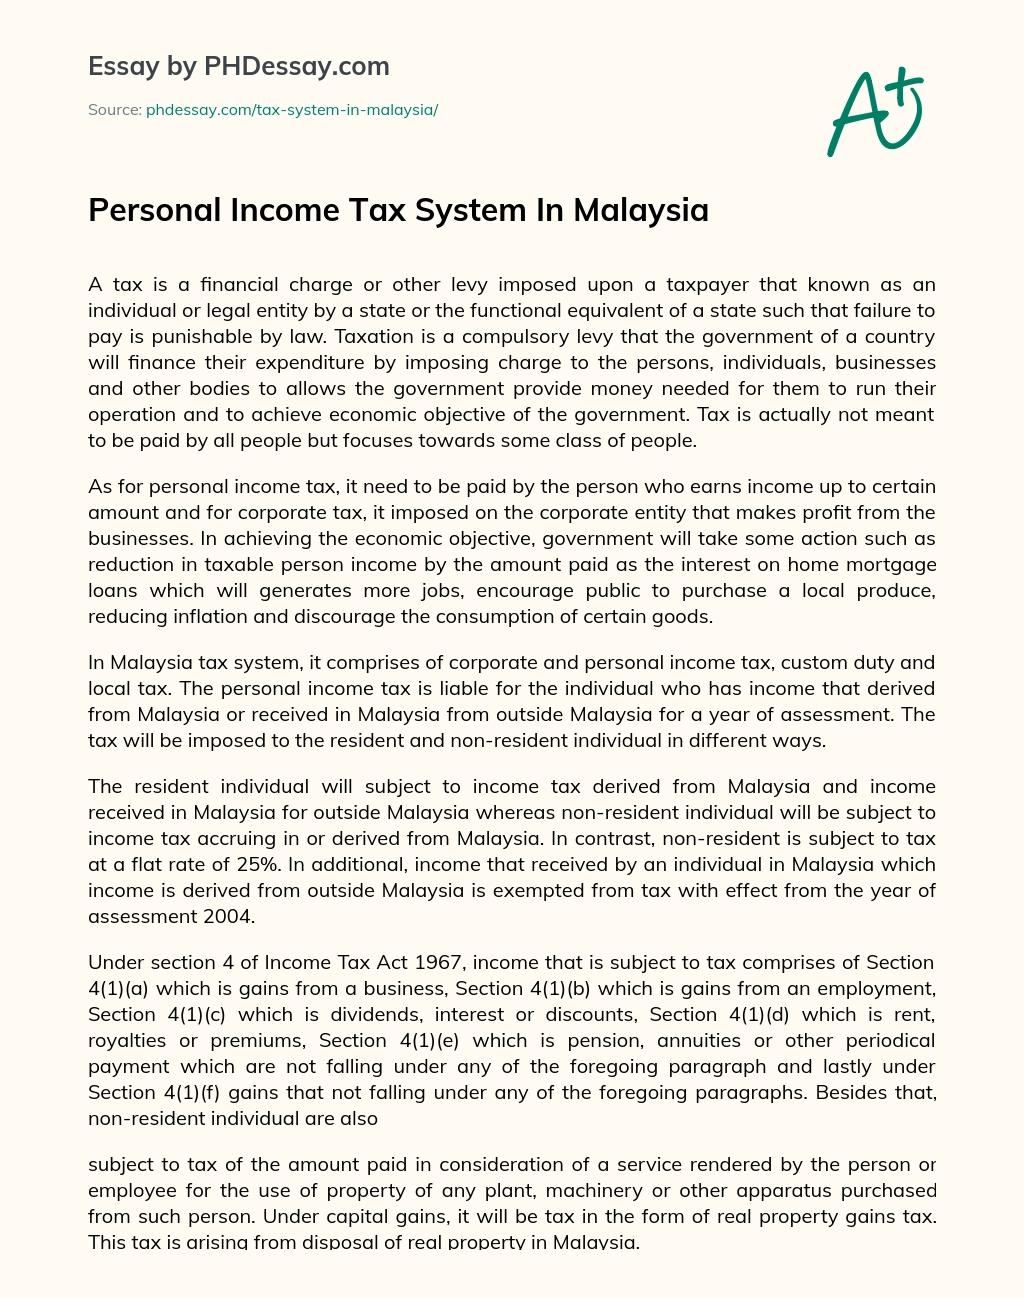 Personal Income Tax System In Malaysia essay